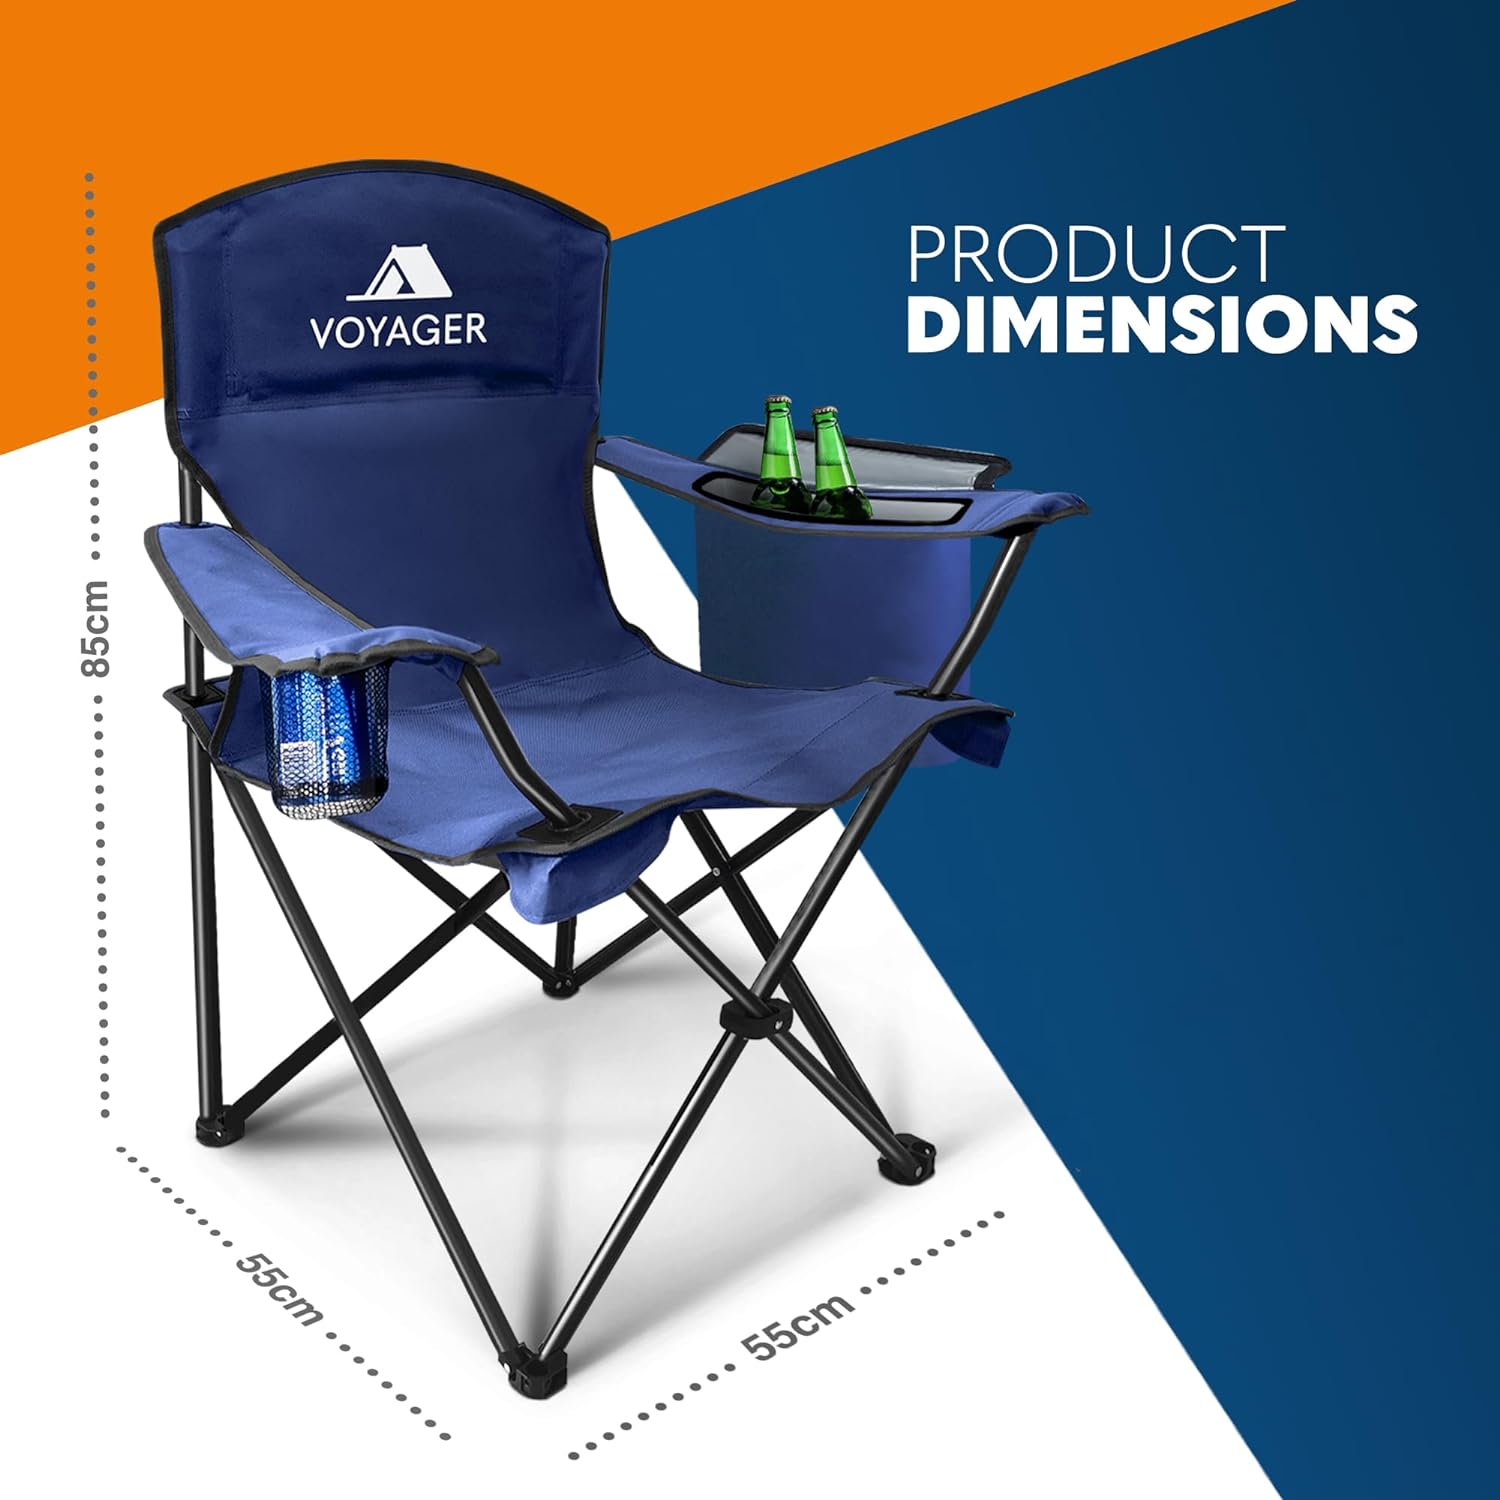 Voyager Folding Camping Chairs - UK